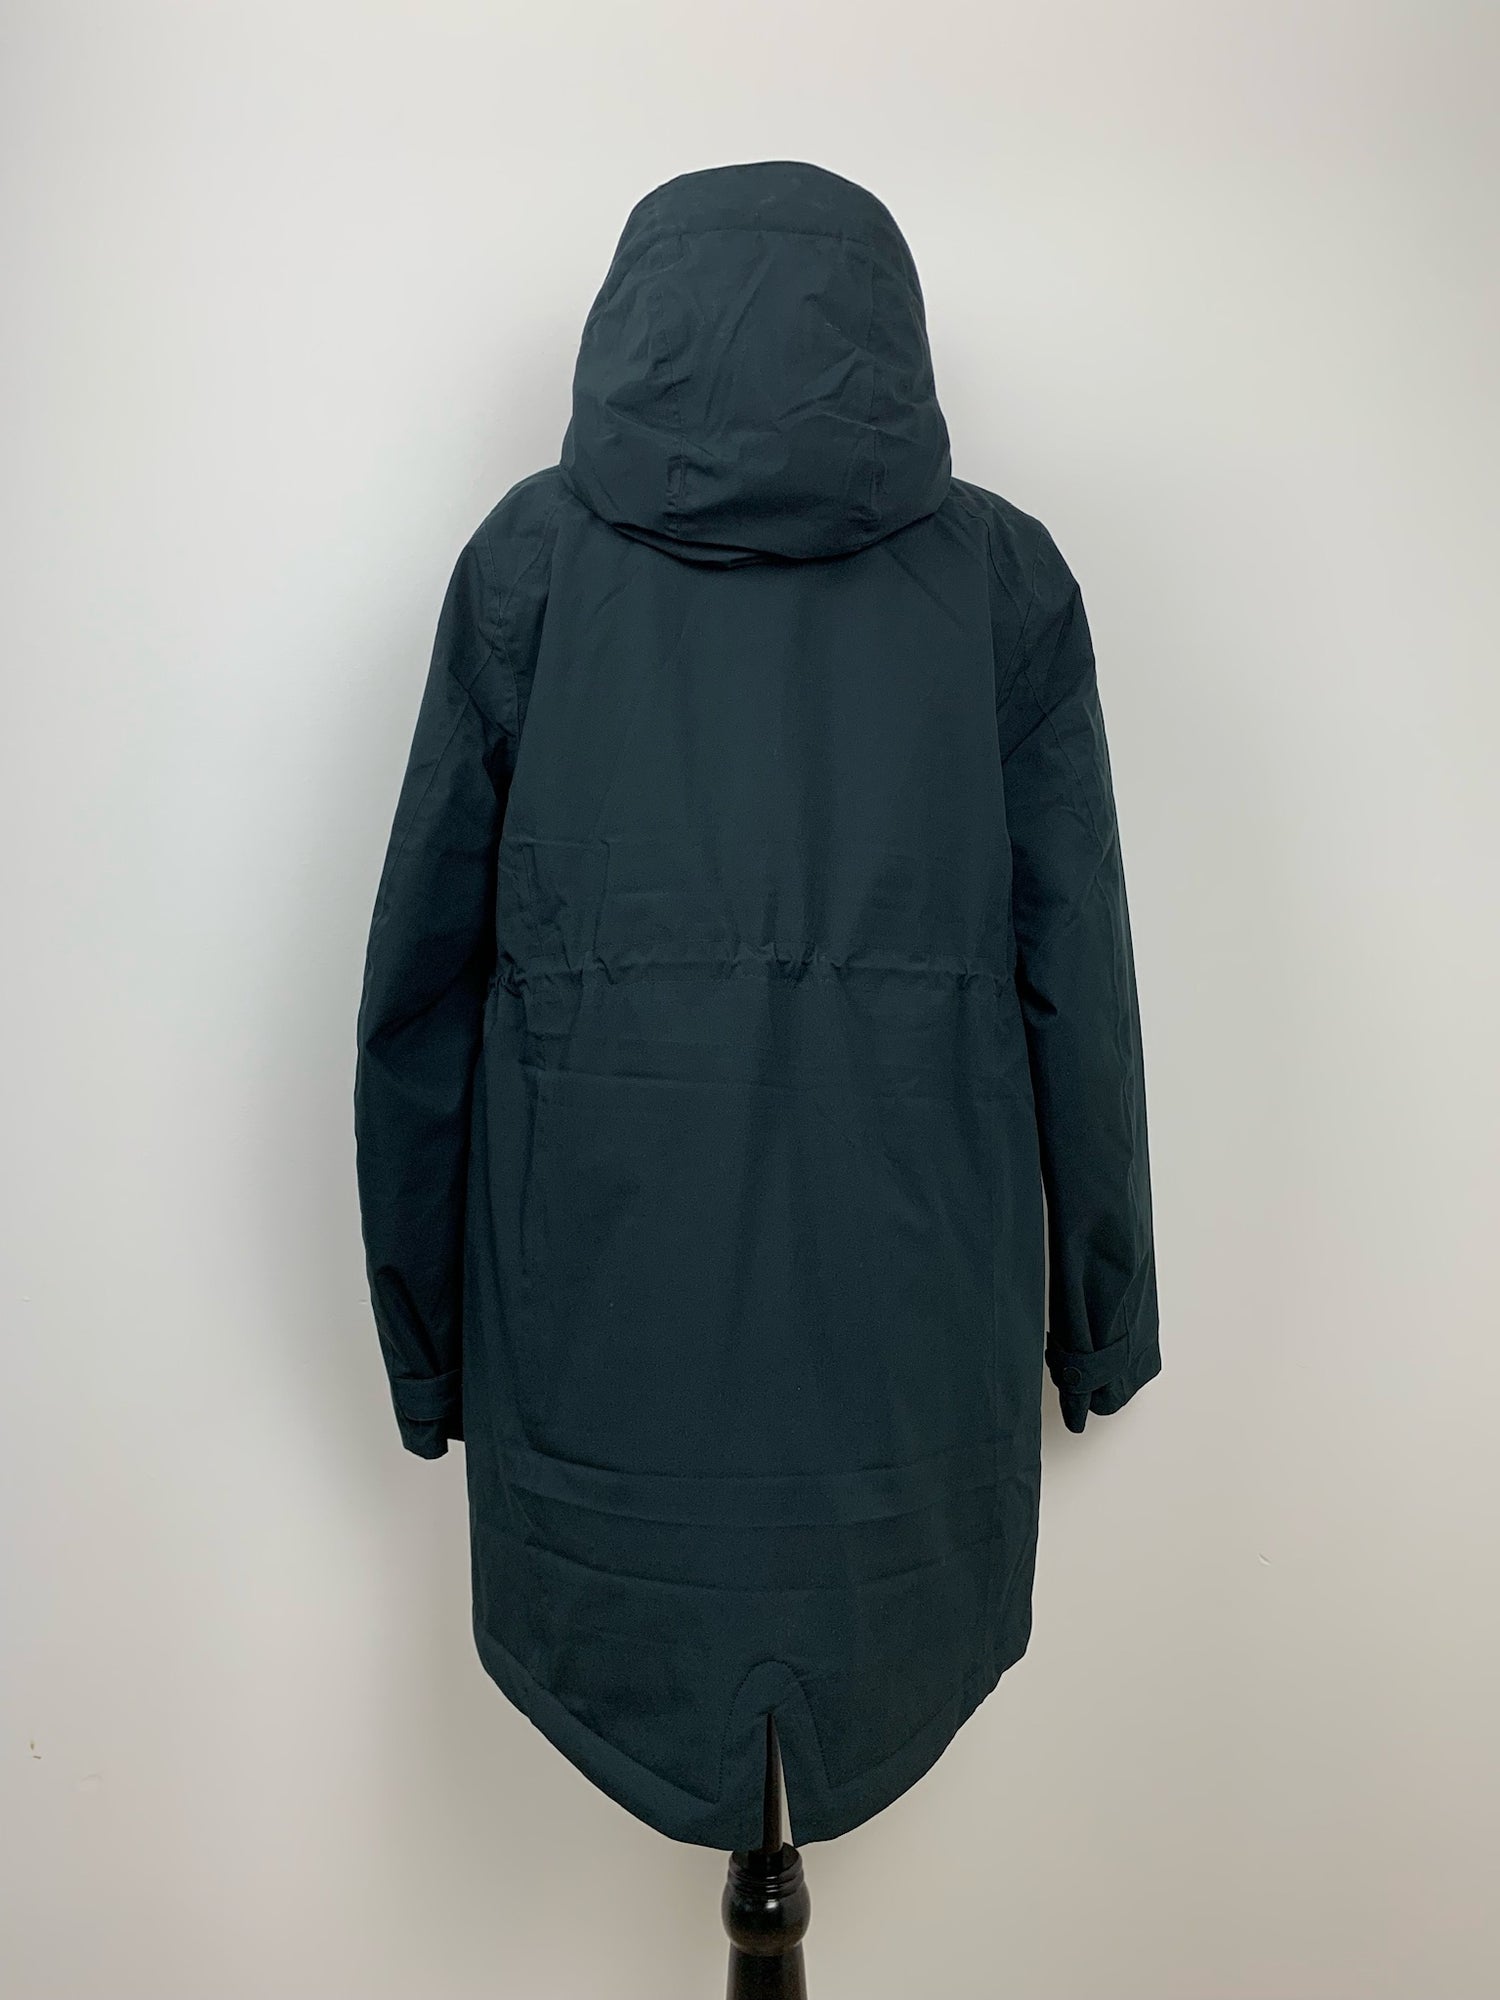 Lole Piper Insulated Jacket